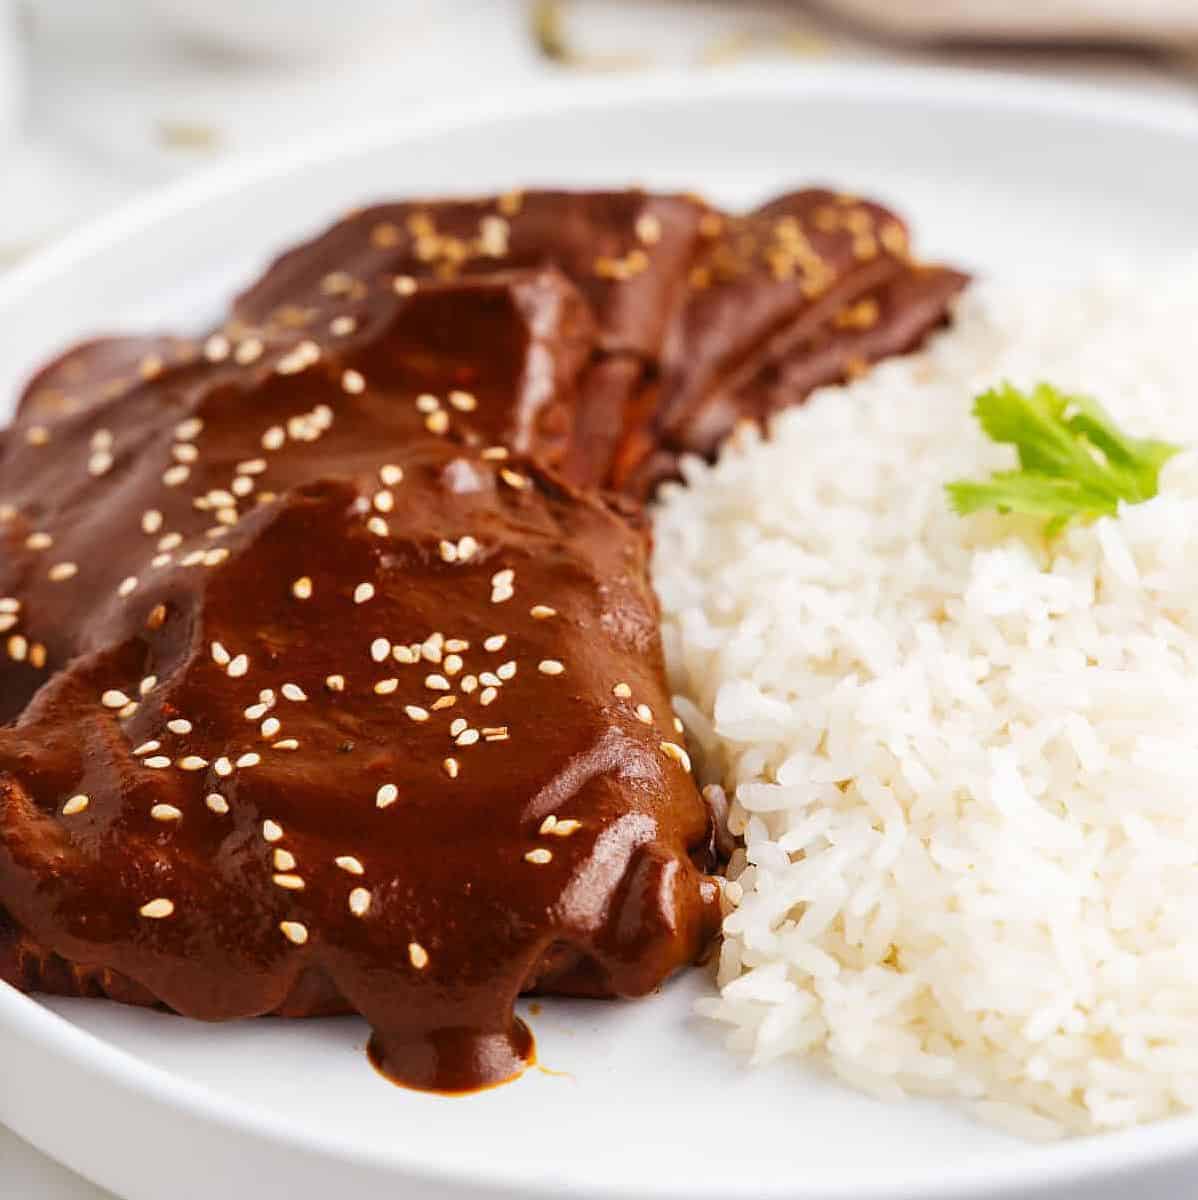  The rich and chocolaty mole sauce is the star of this dish